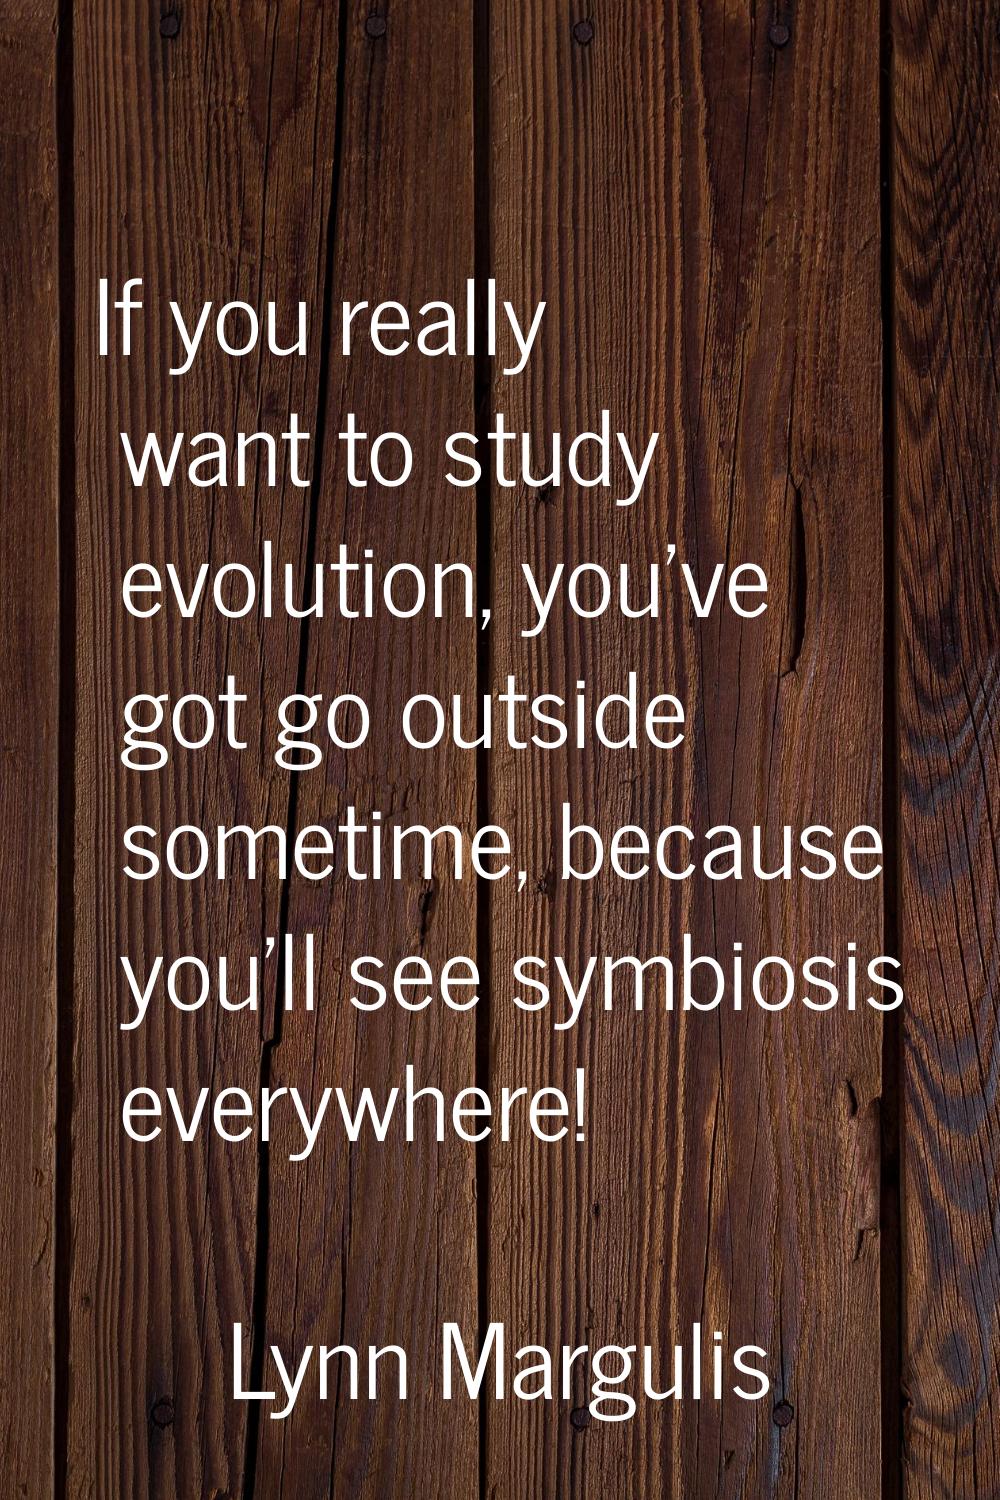 If you really want to study evolution, you've got go outside sometime, because you'll see symbiosis